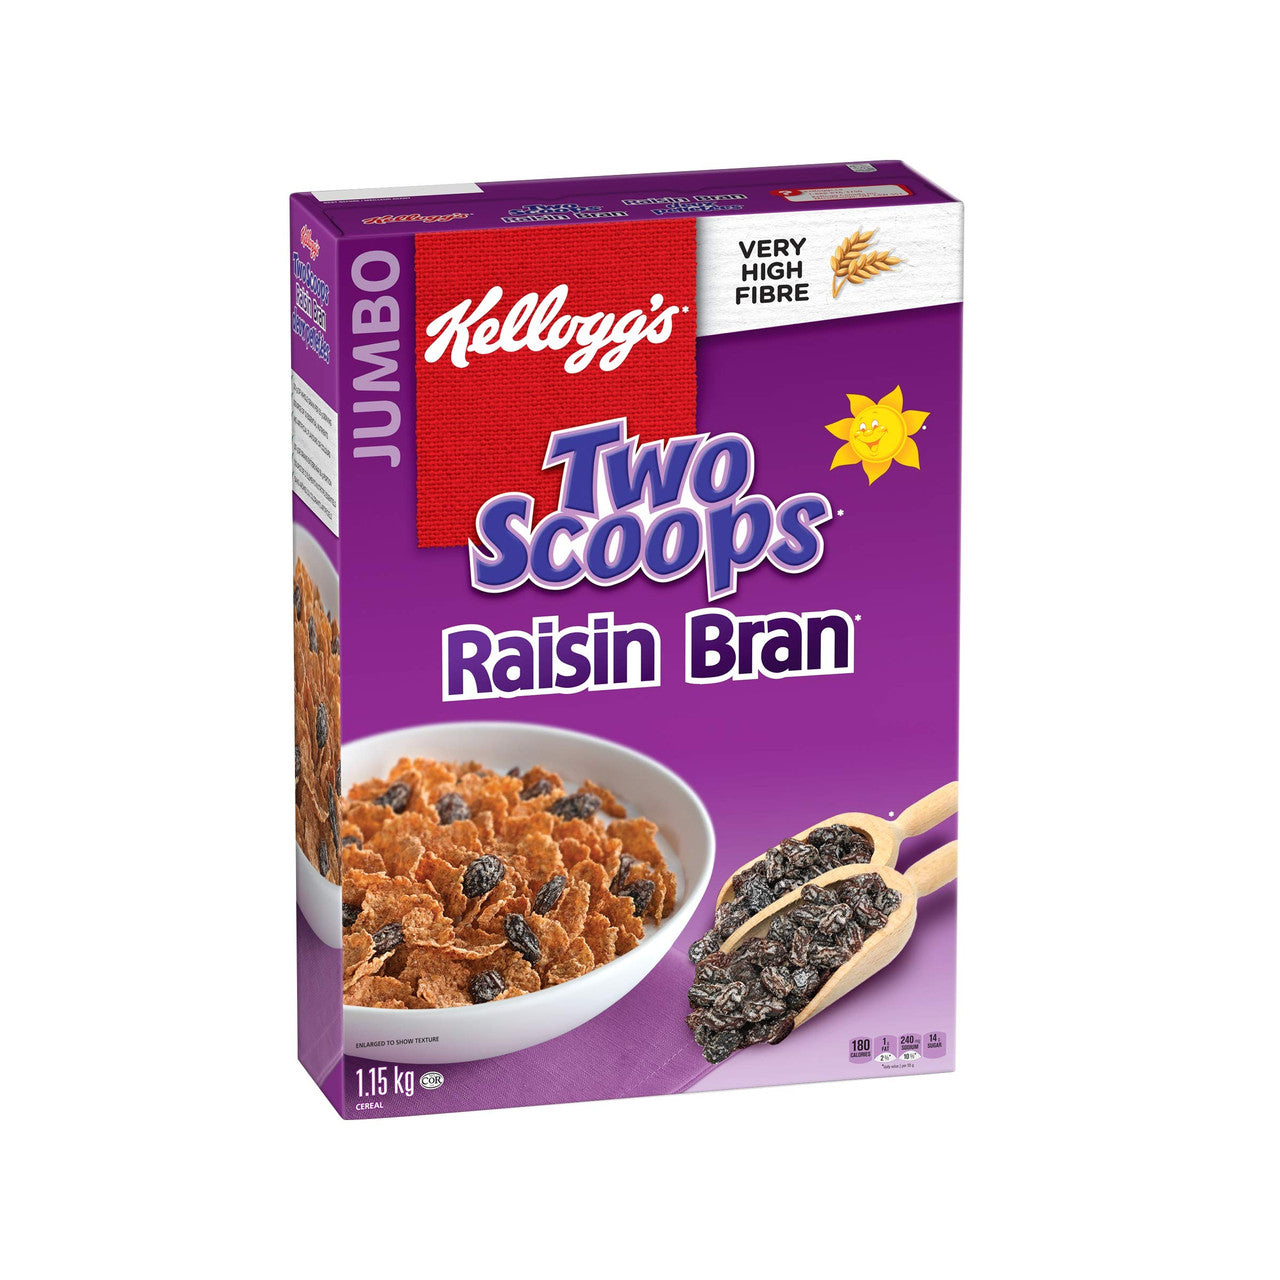 Kellogg's, Two Scoops, Raisin Bran Cereal, 1150g/40.6 oz., {Imported from Canada}